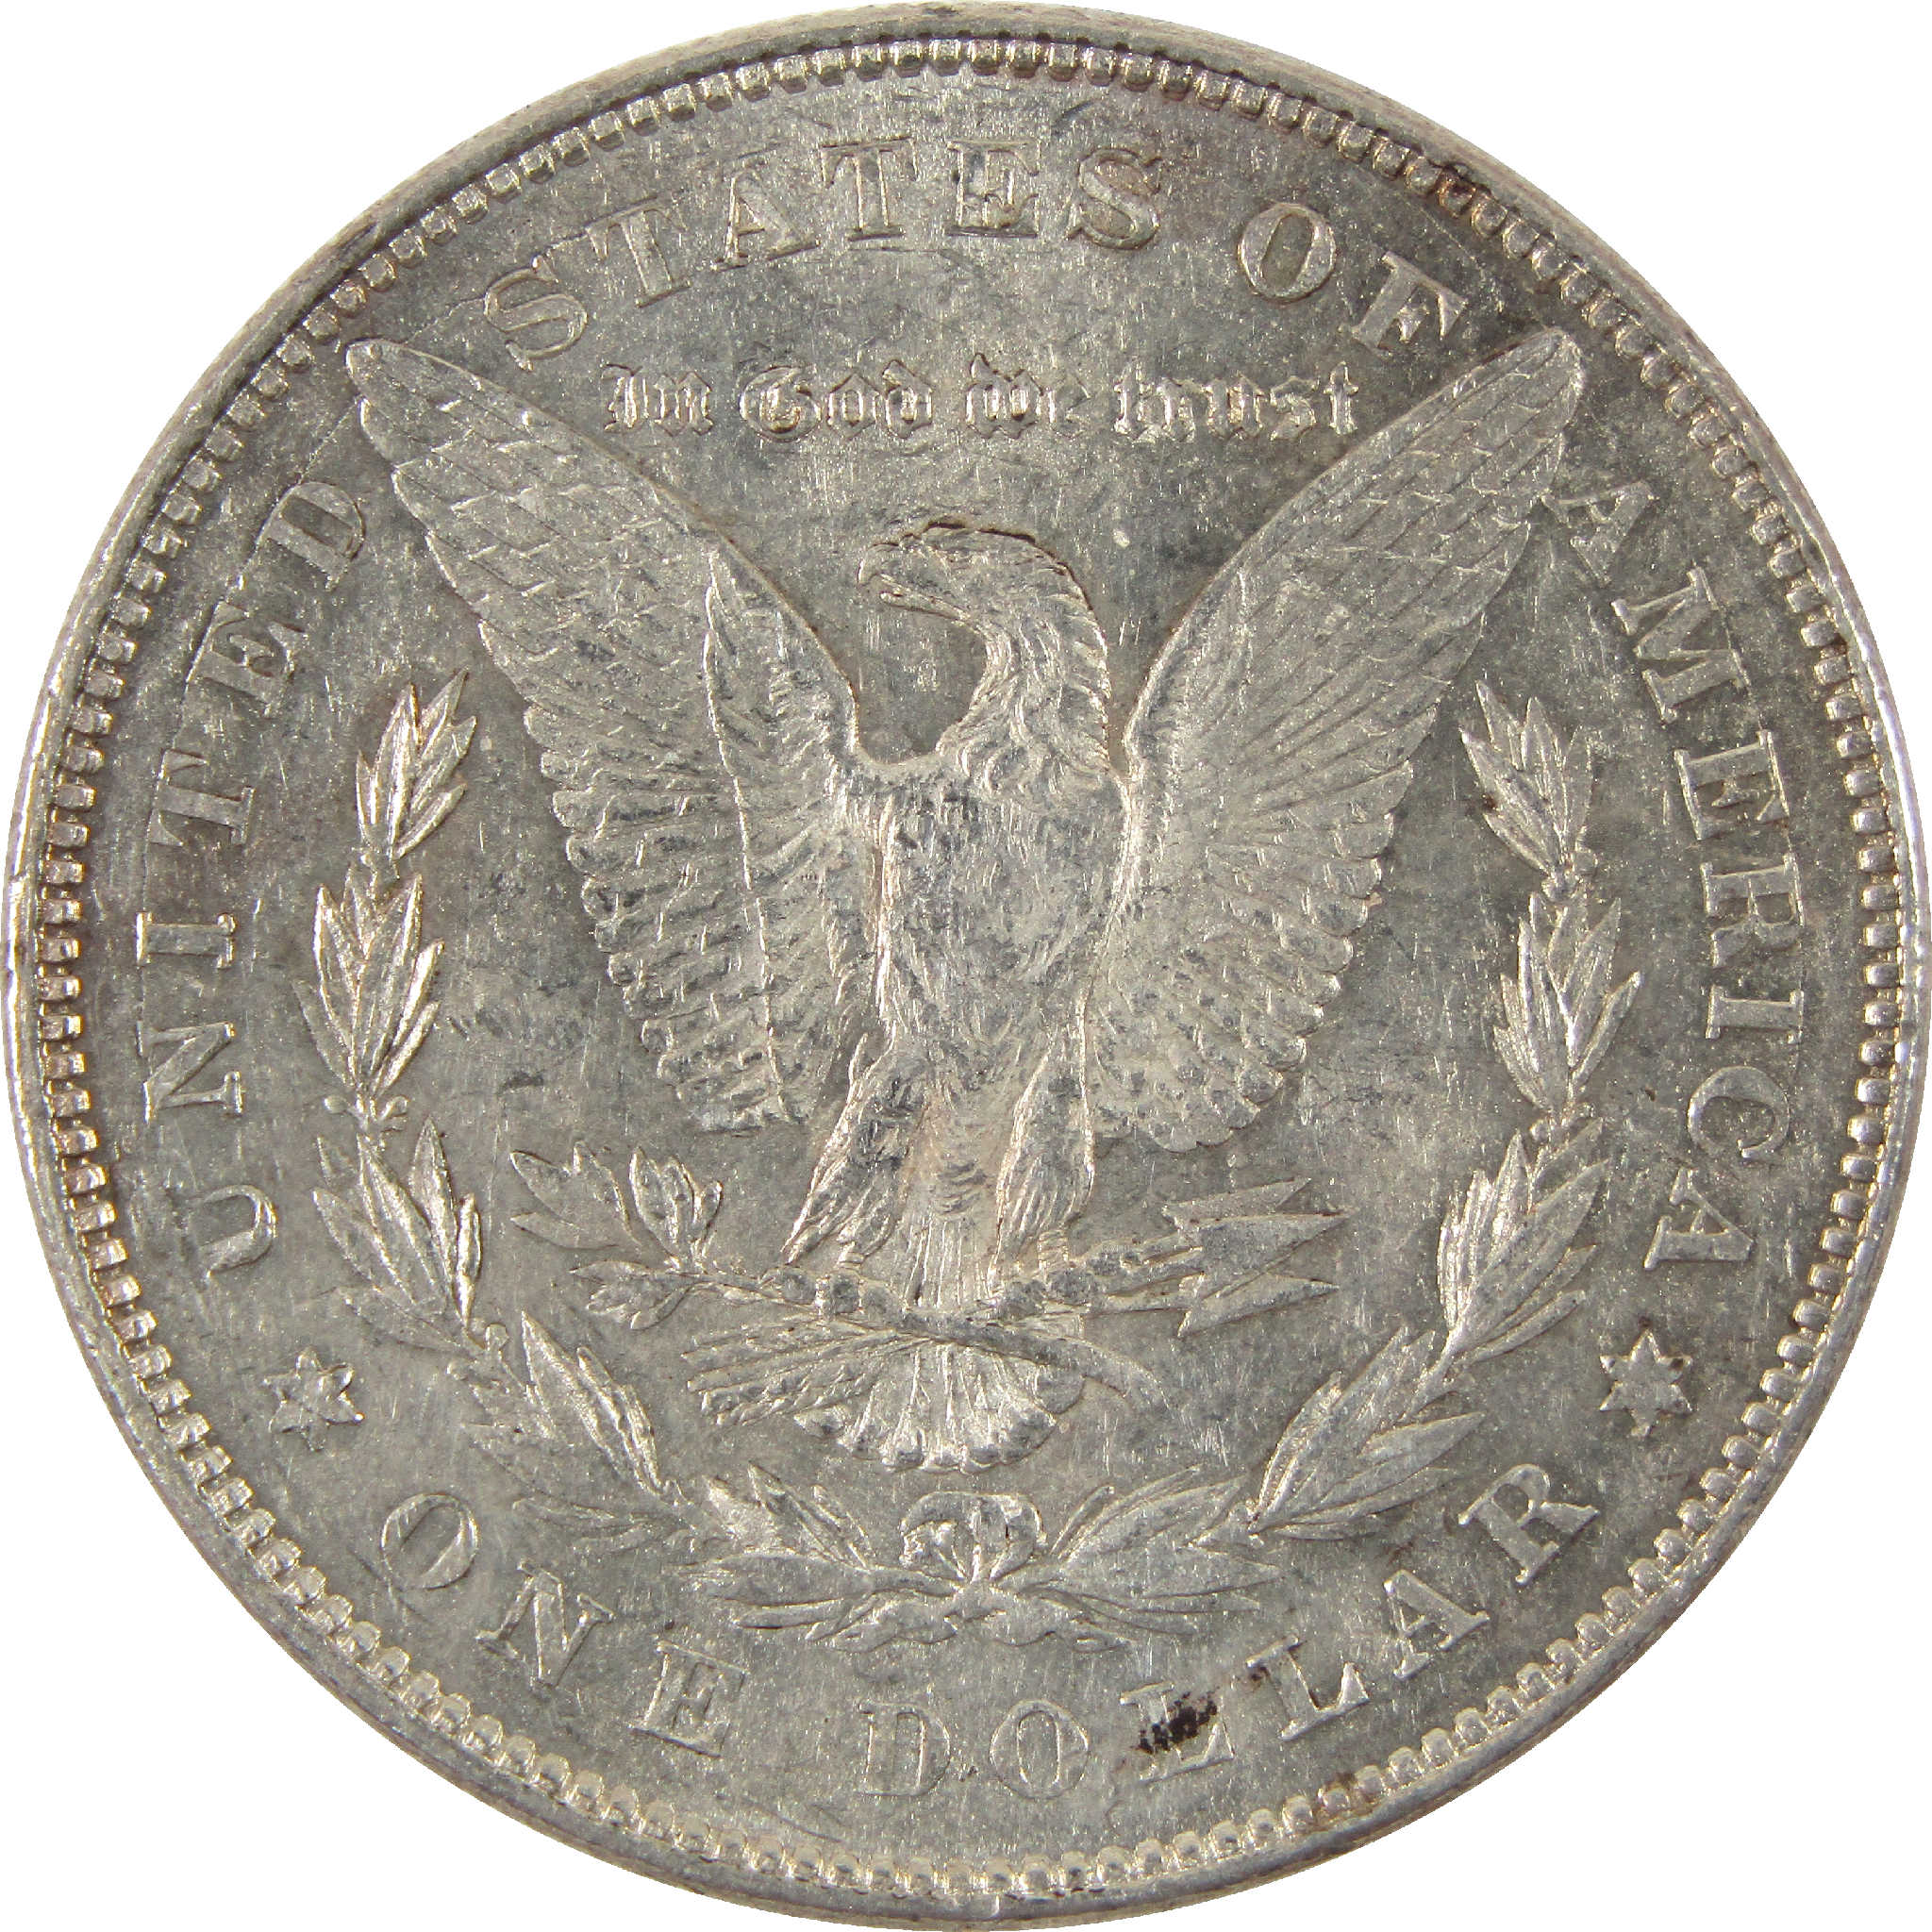 1878 7/8TF Morgan Dollar AU About Uncirculated Silver $1 SKU:CPC6164 - Morgan coin - Morgan silver dollar - Morgan silver dollar for sale - Profile Coins &amp; Collectibles